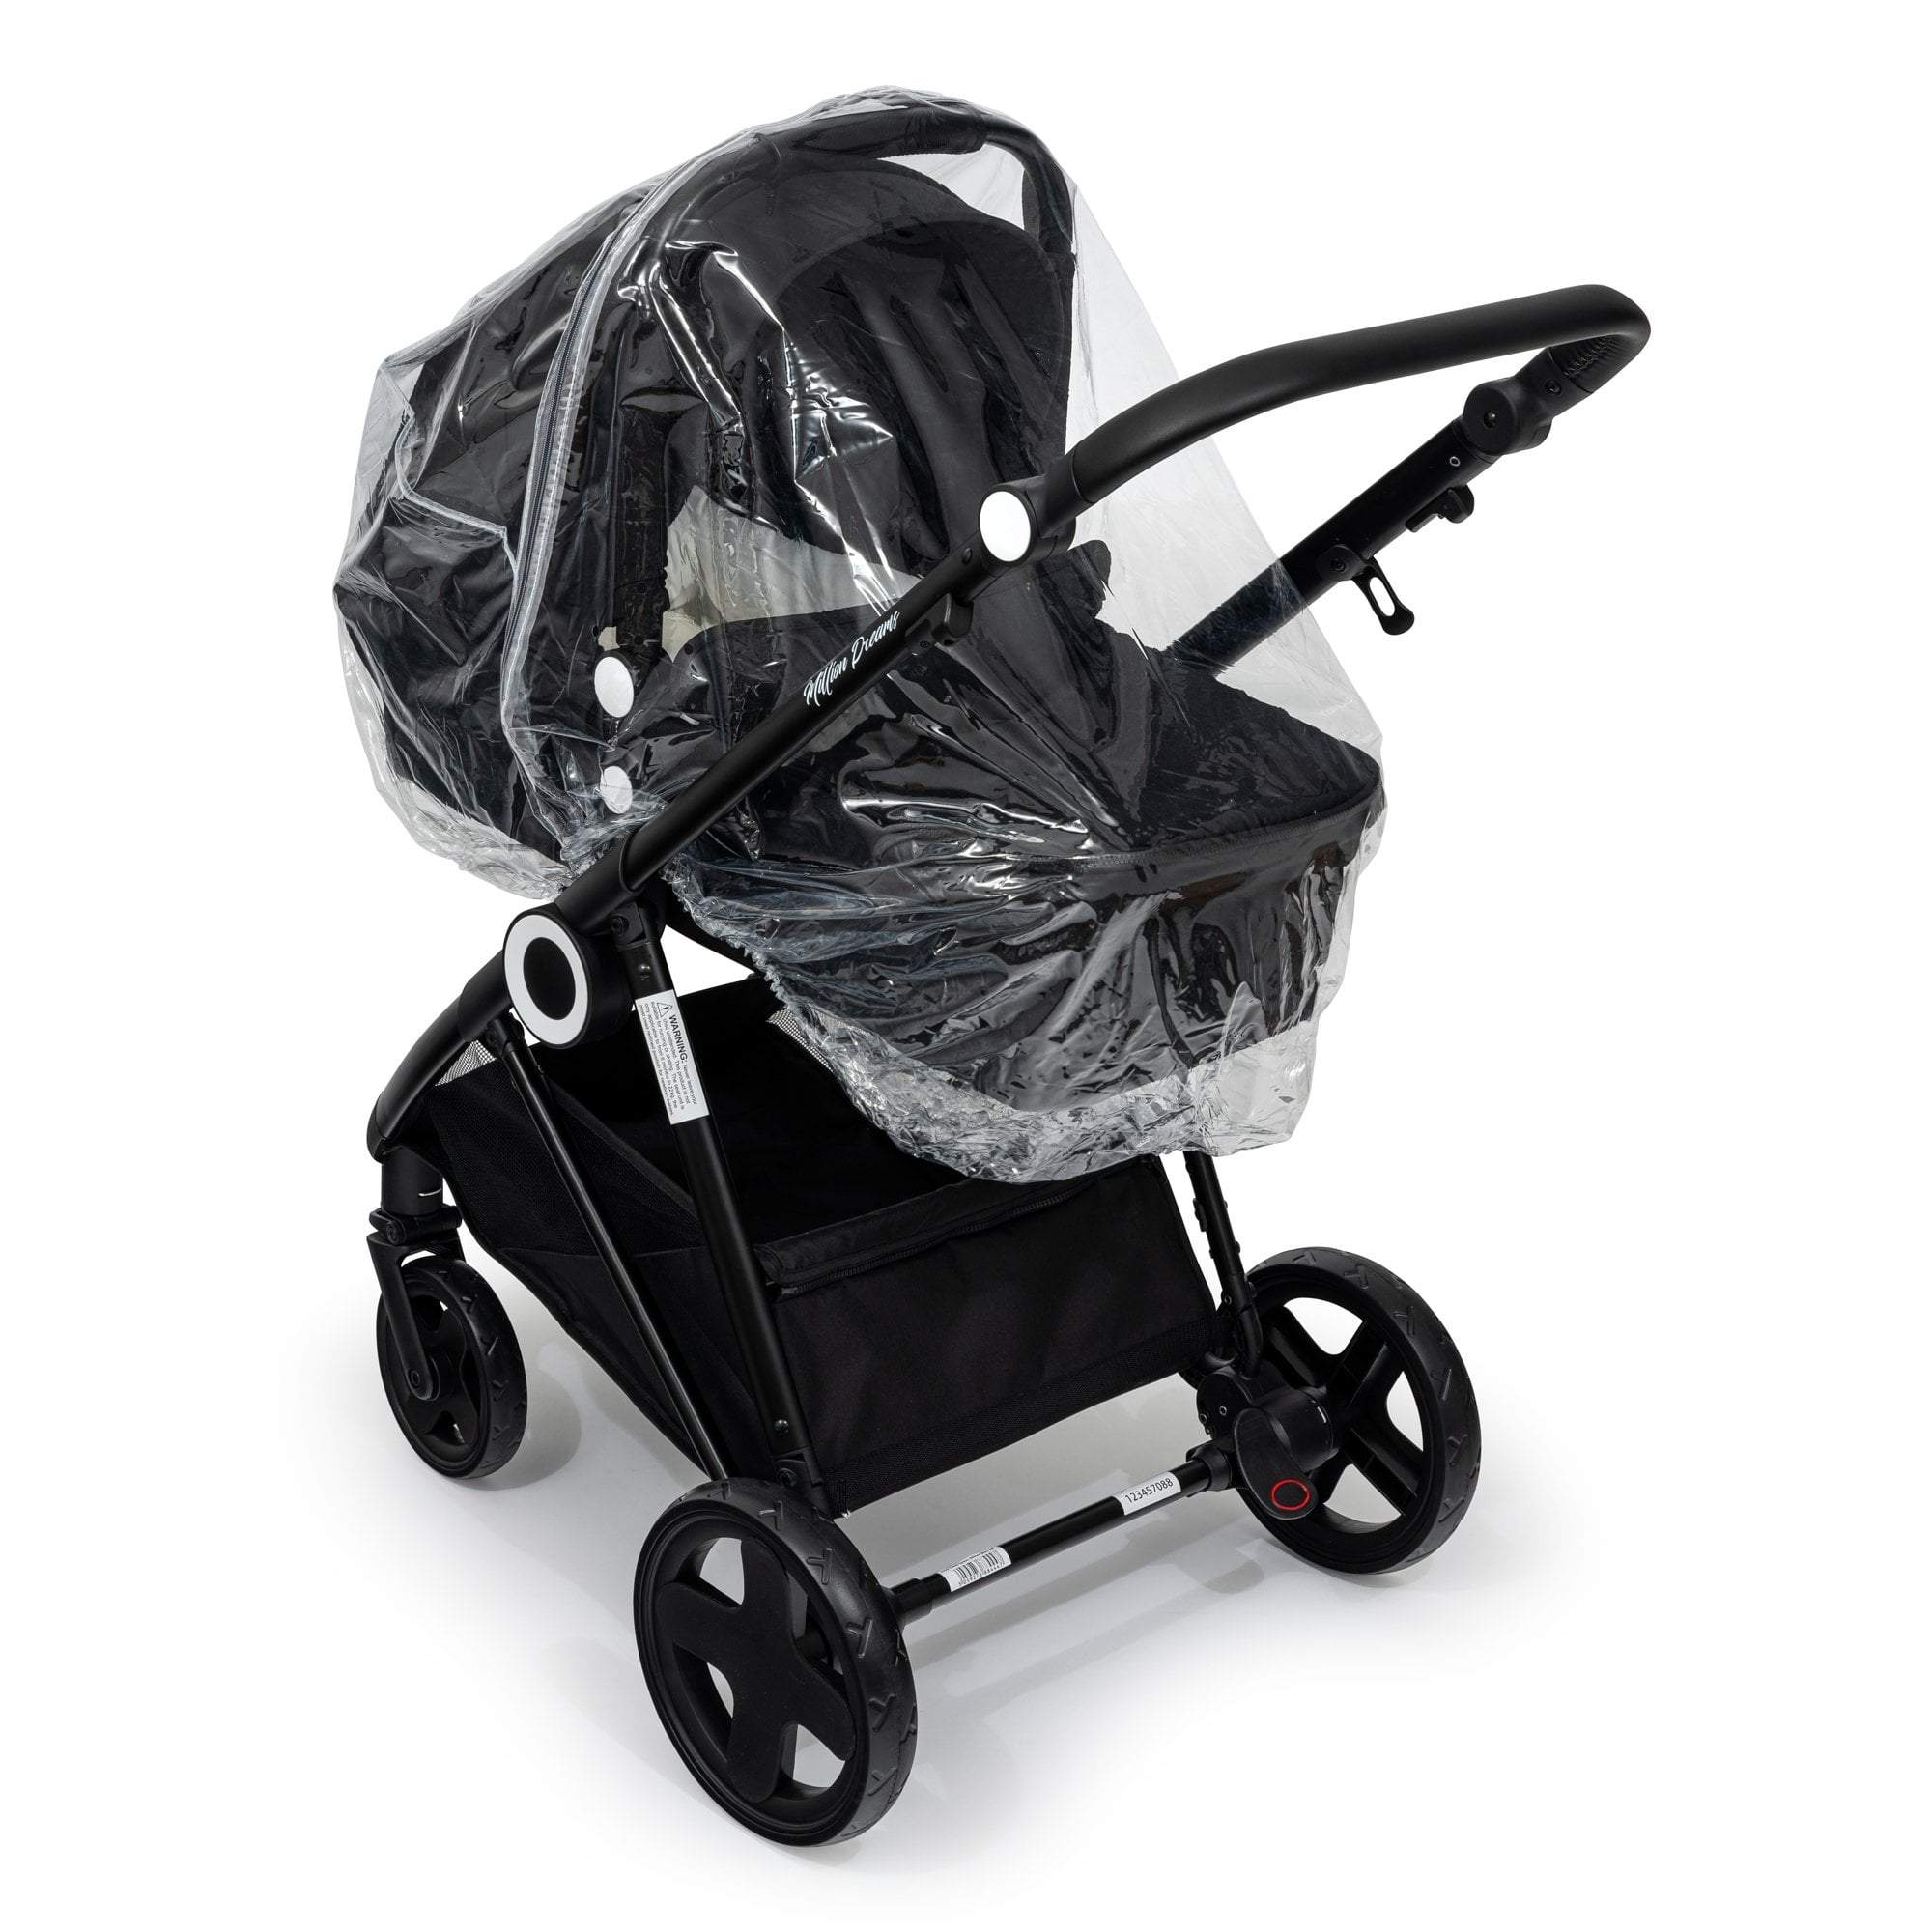 Carrycot Raincover Compatible With Brio - Fits All Models - For Your Little One